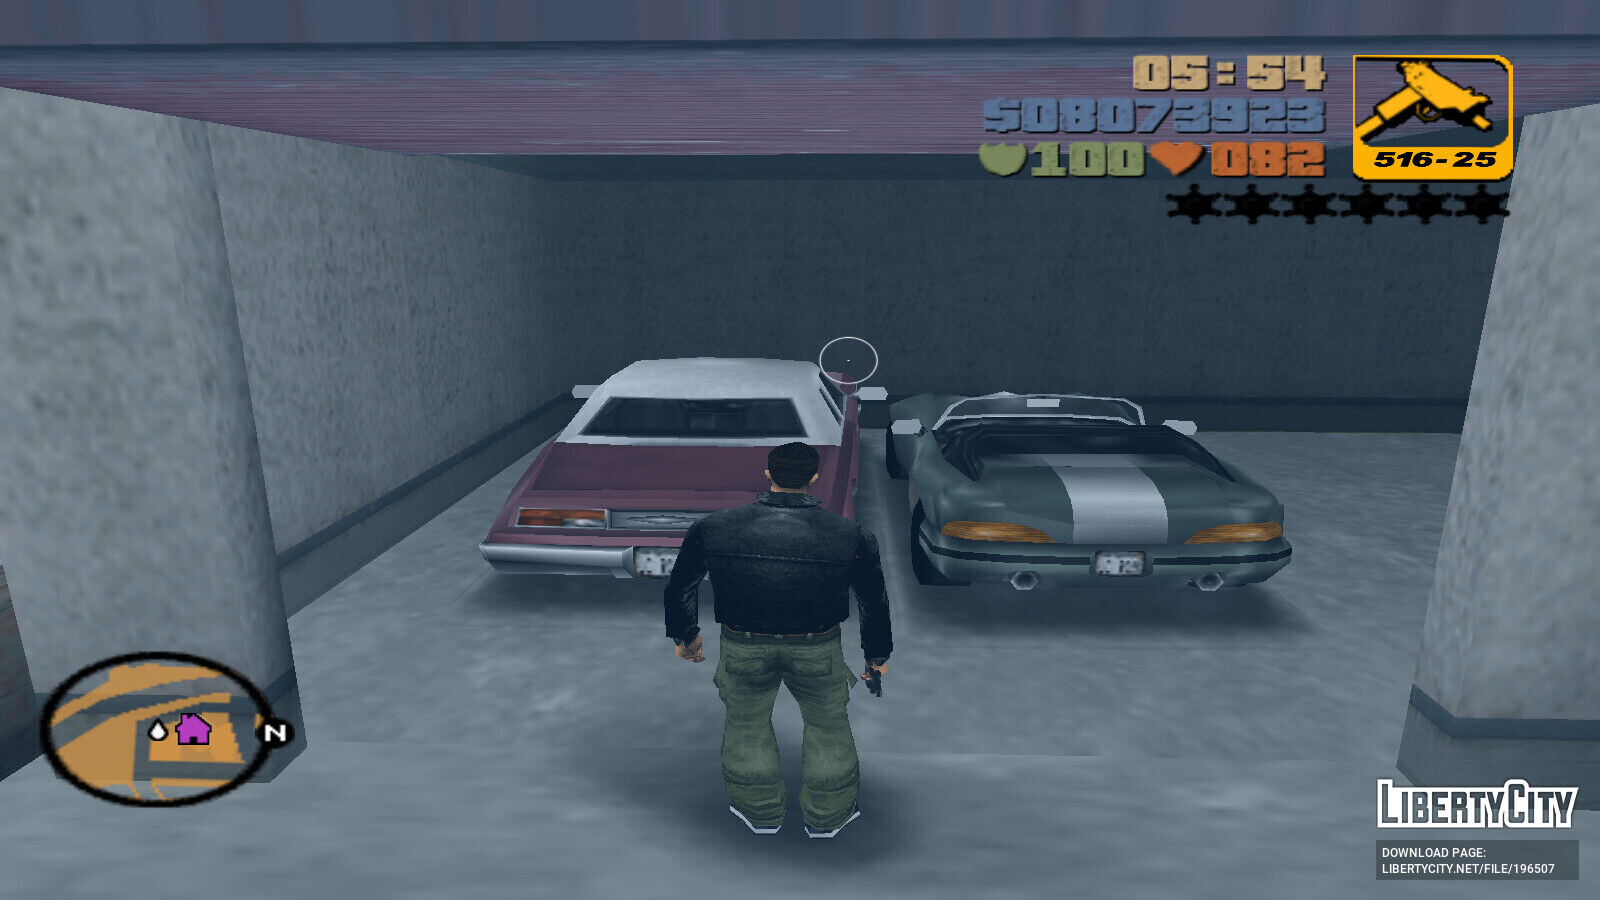 How To Downlaod Gta 3 Game Just 224 Mb SOFT KNOWLEDGE,  By Soft Knowledge